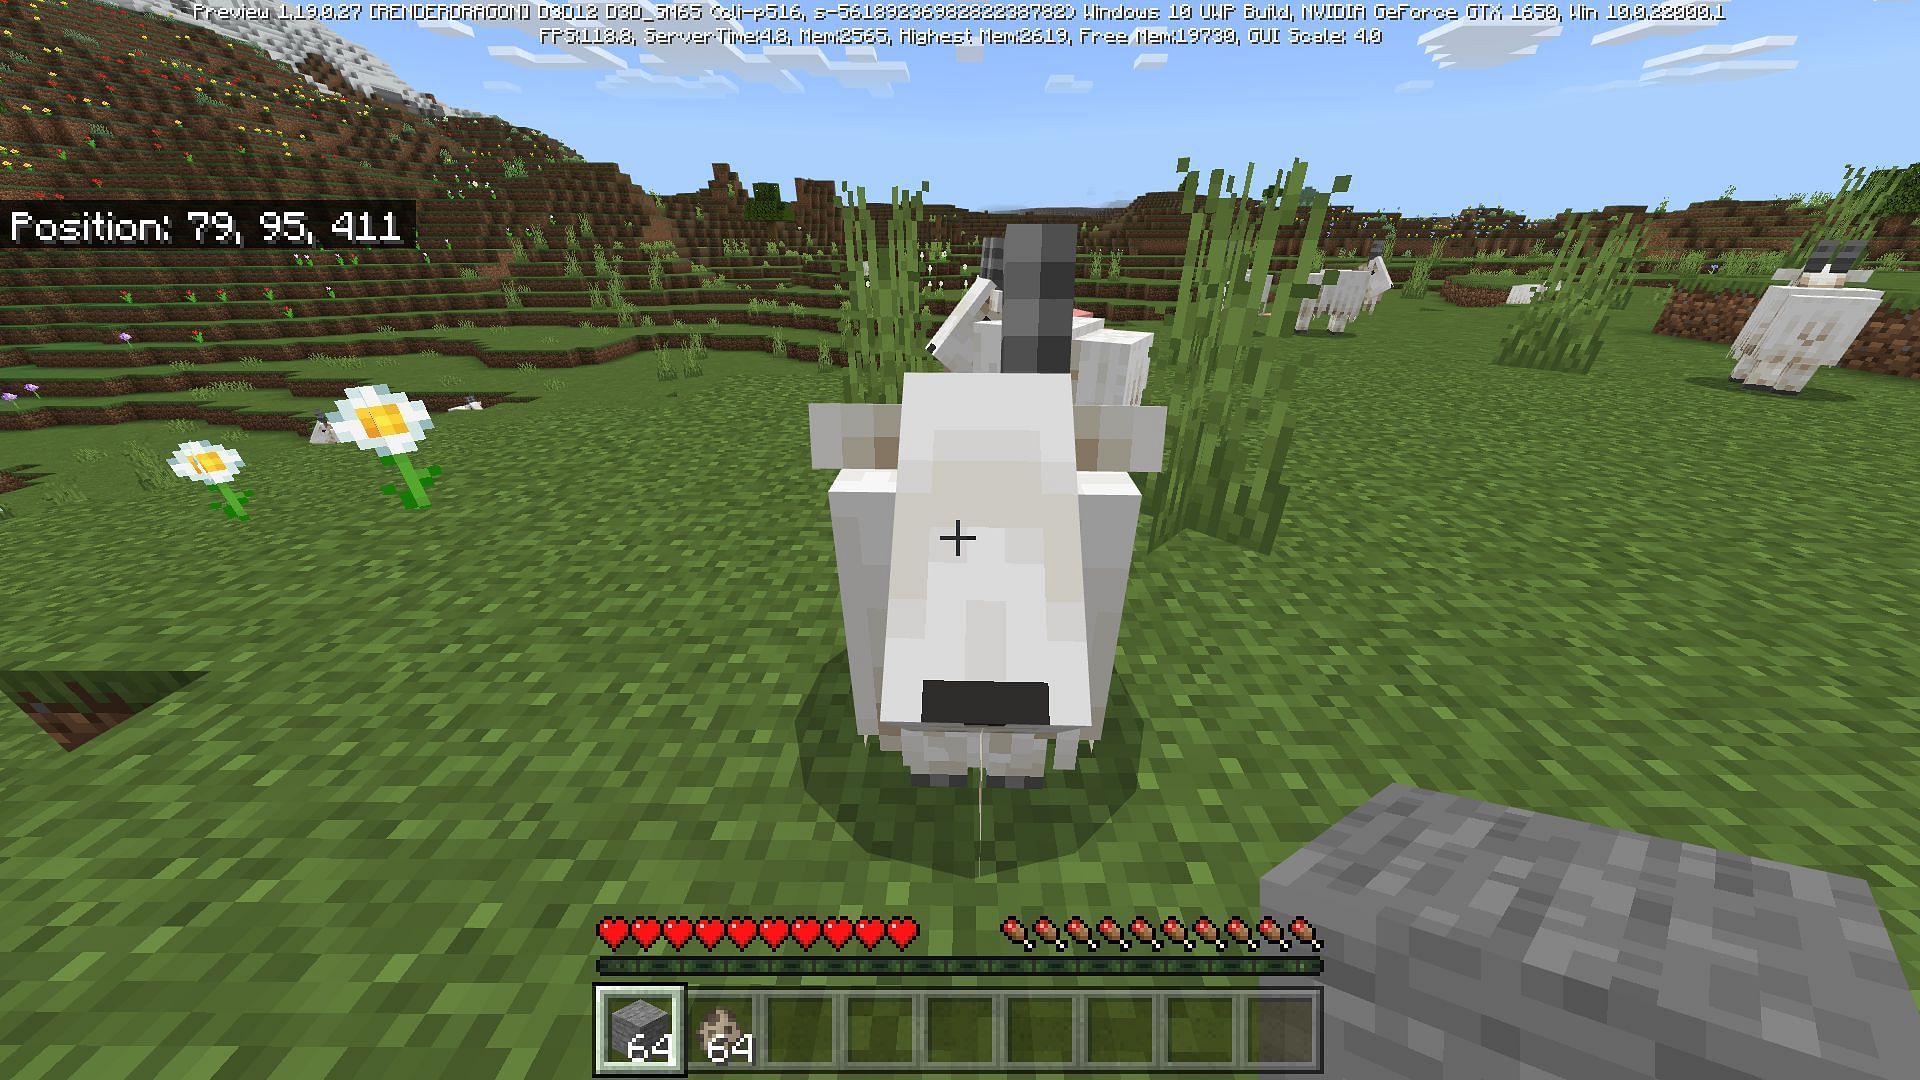 Goats particularly drop their horns of different kinds, which can also be found in Pillager Outposts (Image via Mojang Studios)